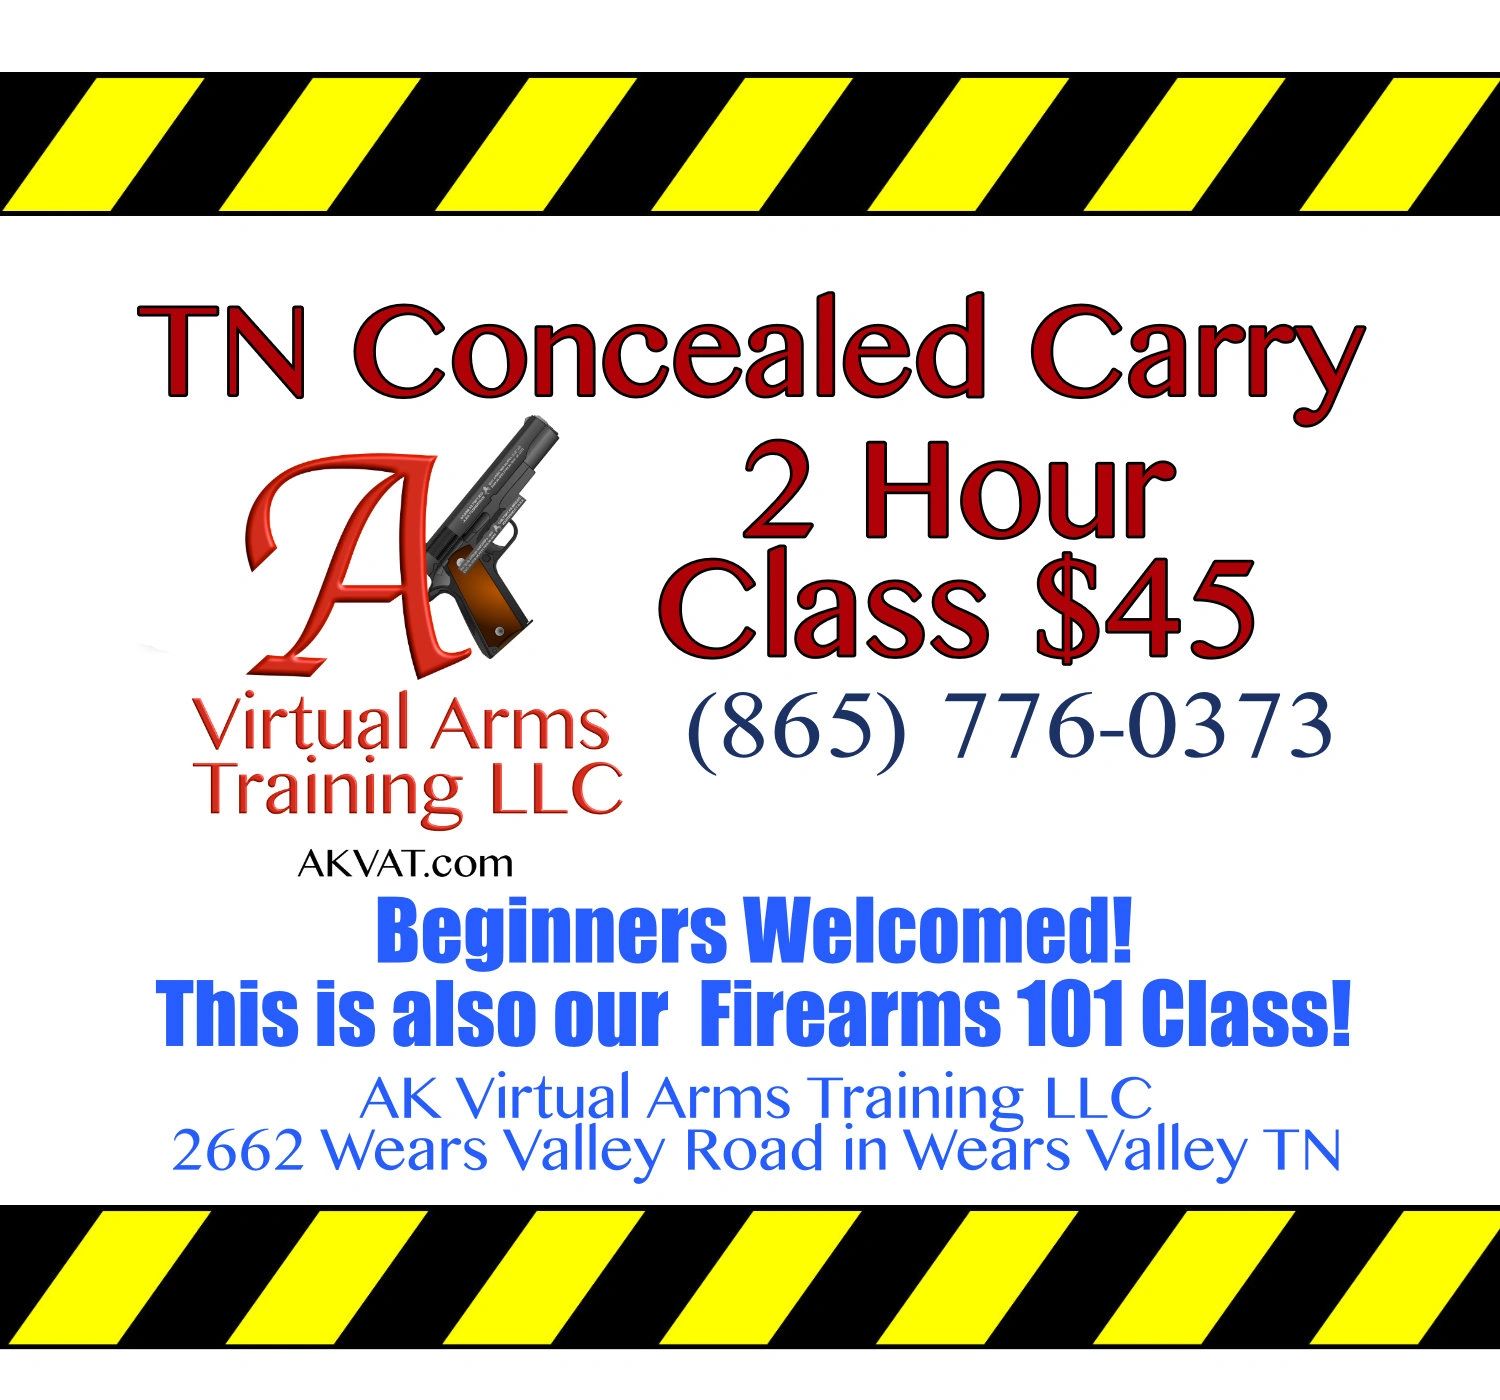 WEDNESDAY TN Concealed Carry Permit Class Firearms 101